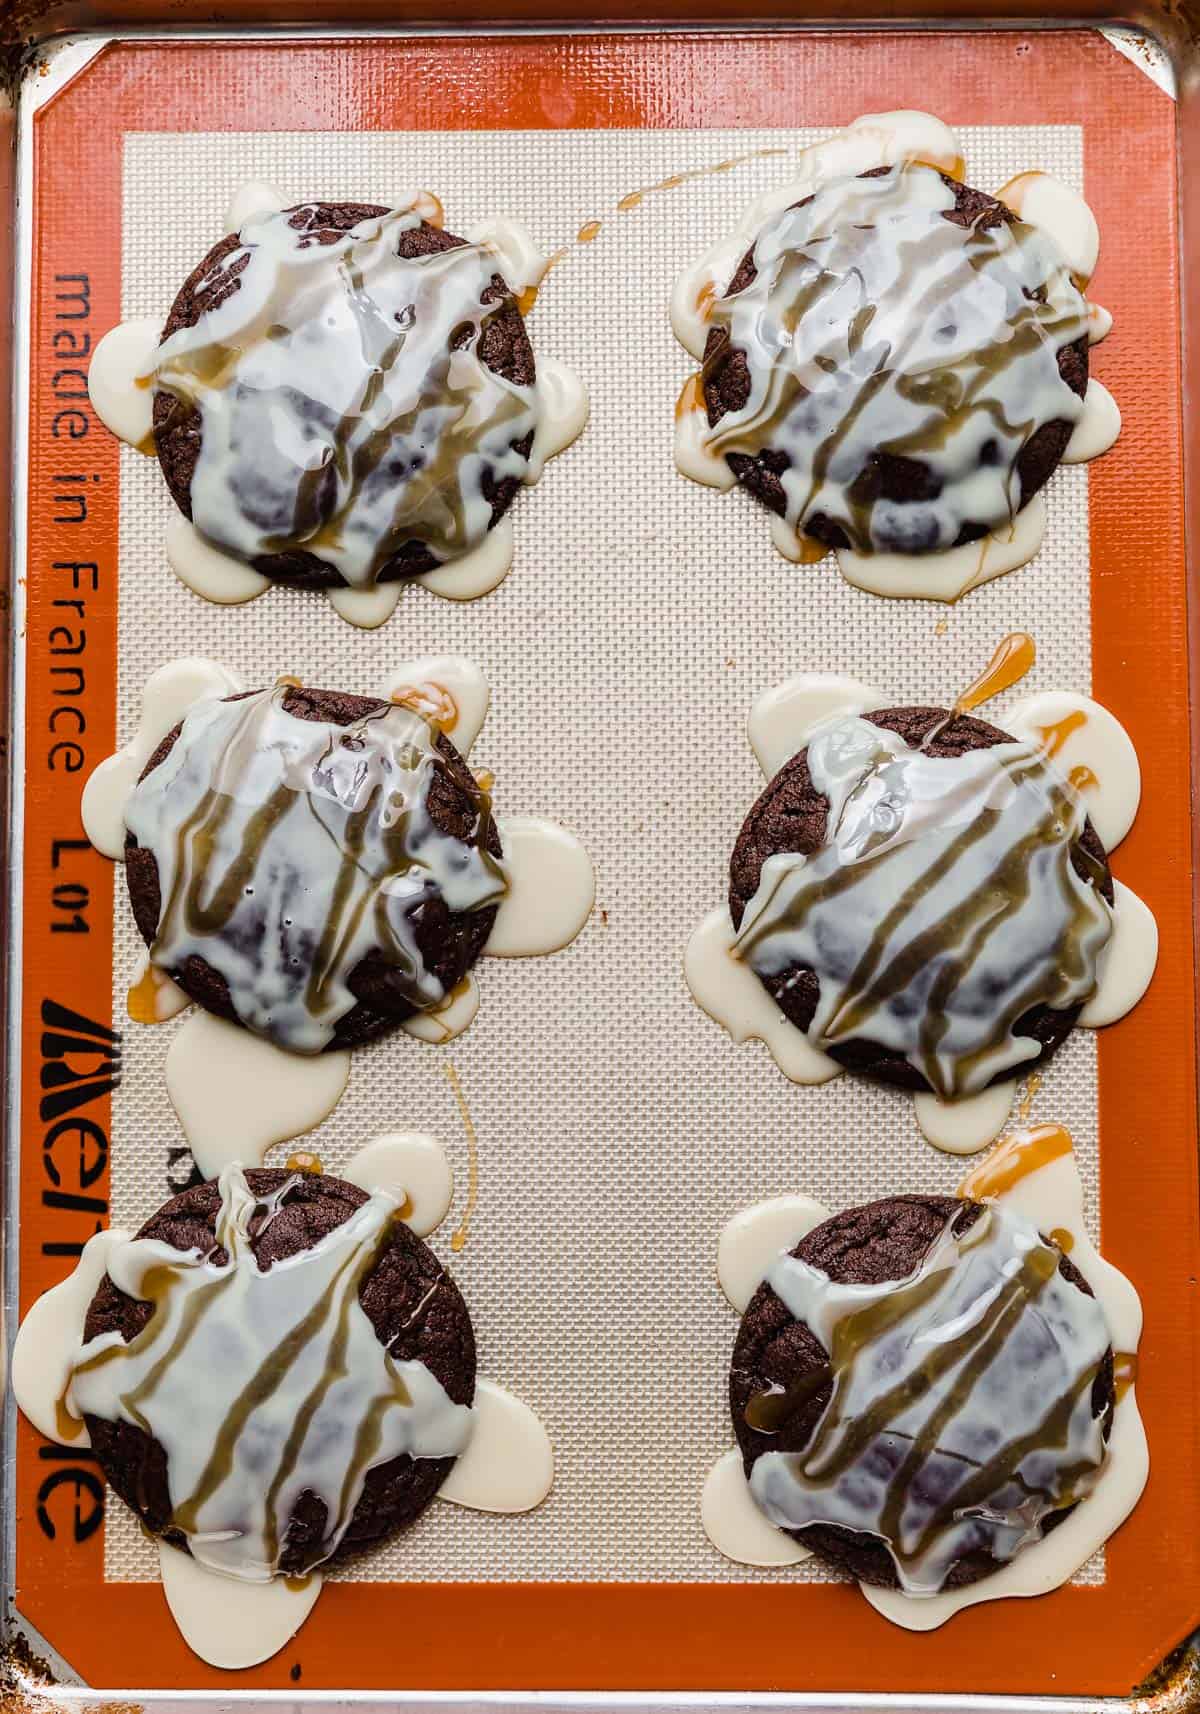 Six chocolate Cookies on a baking sheet with sweetened condensed milk and caramel drizzled overtop each cookie.